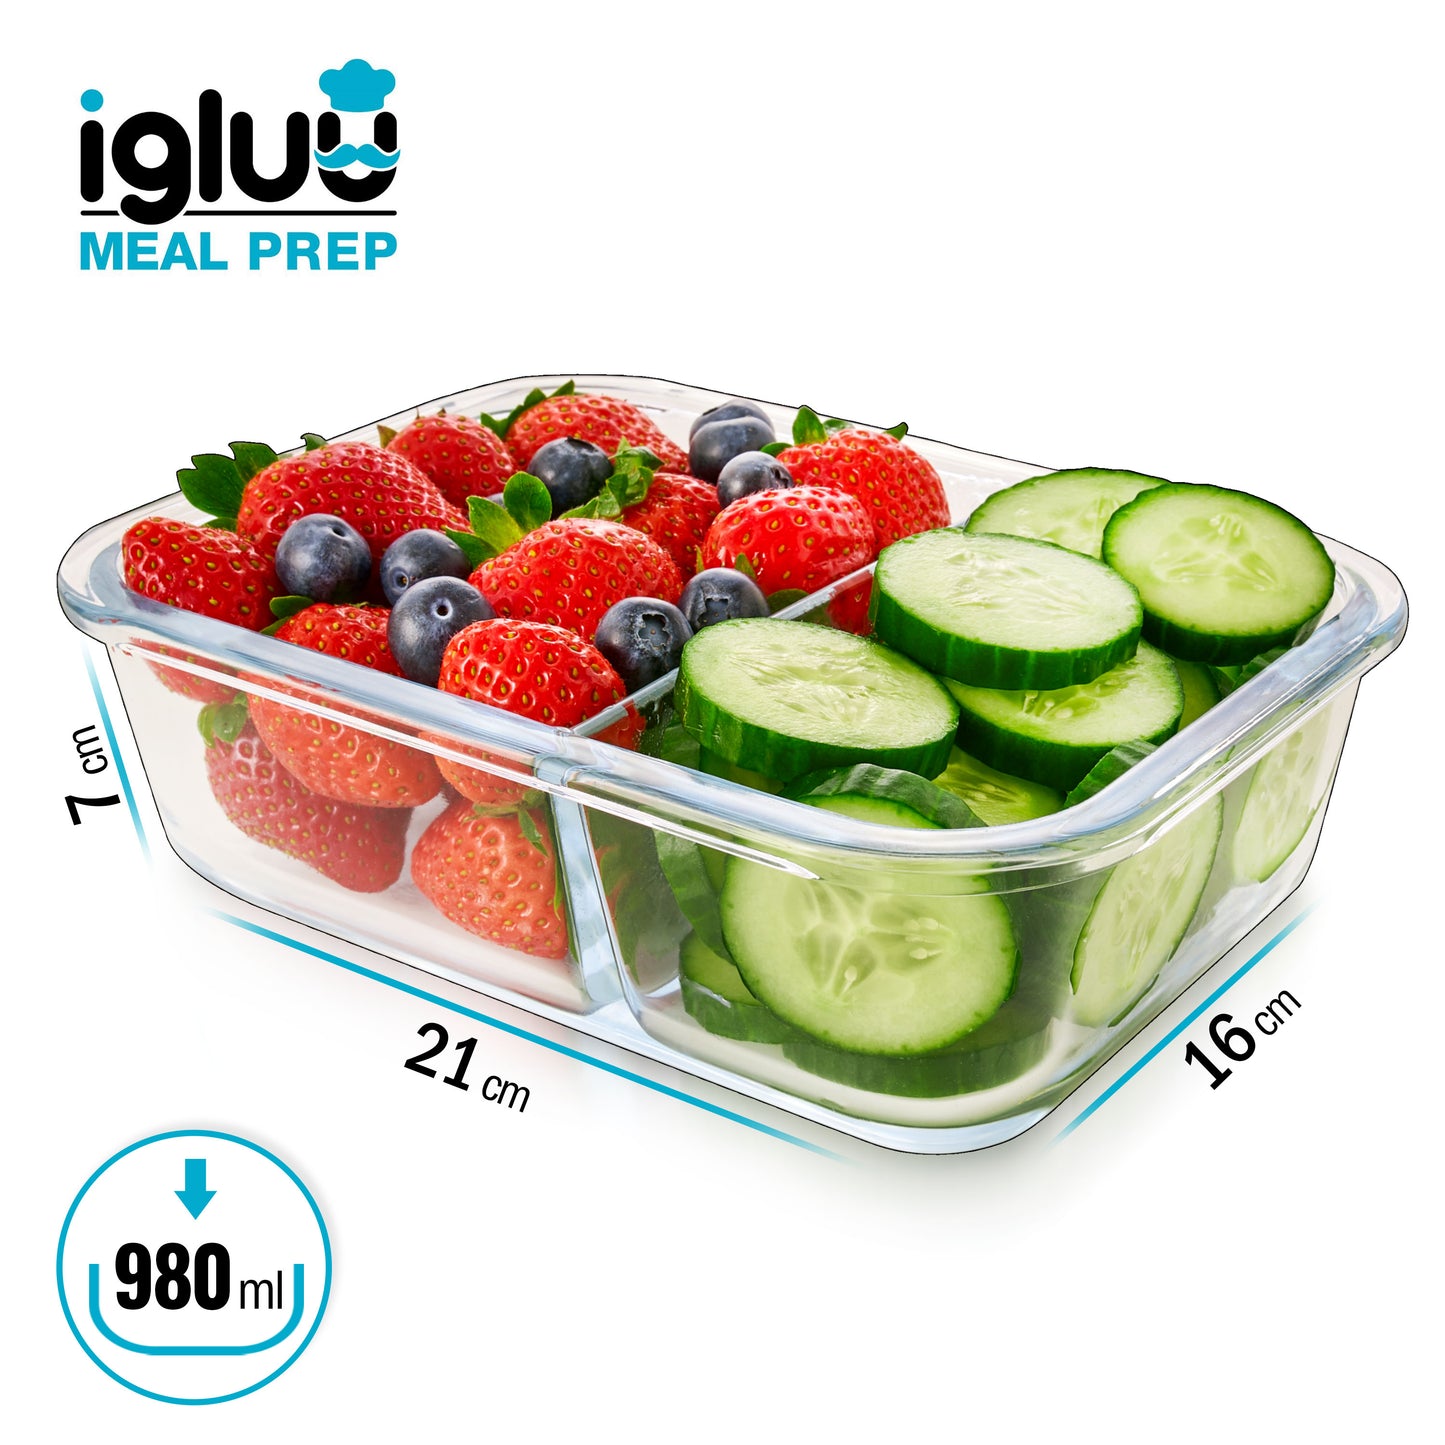 CZUMJJ Glass Meal Prep Containers 2 Compartment with Lids (5 Pack, 34oz),  Divided Glass Storage Containers for Lunch at Work, Leak-Proof Portion